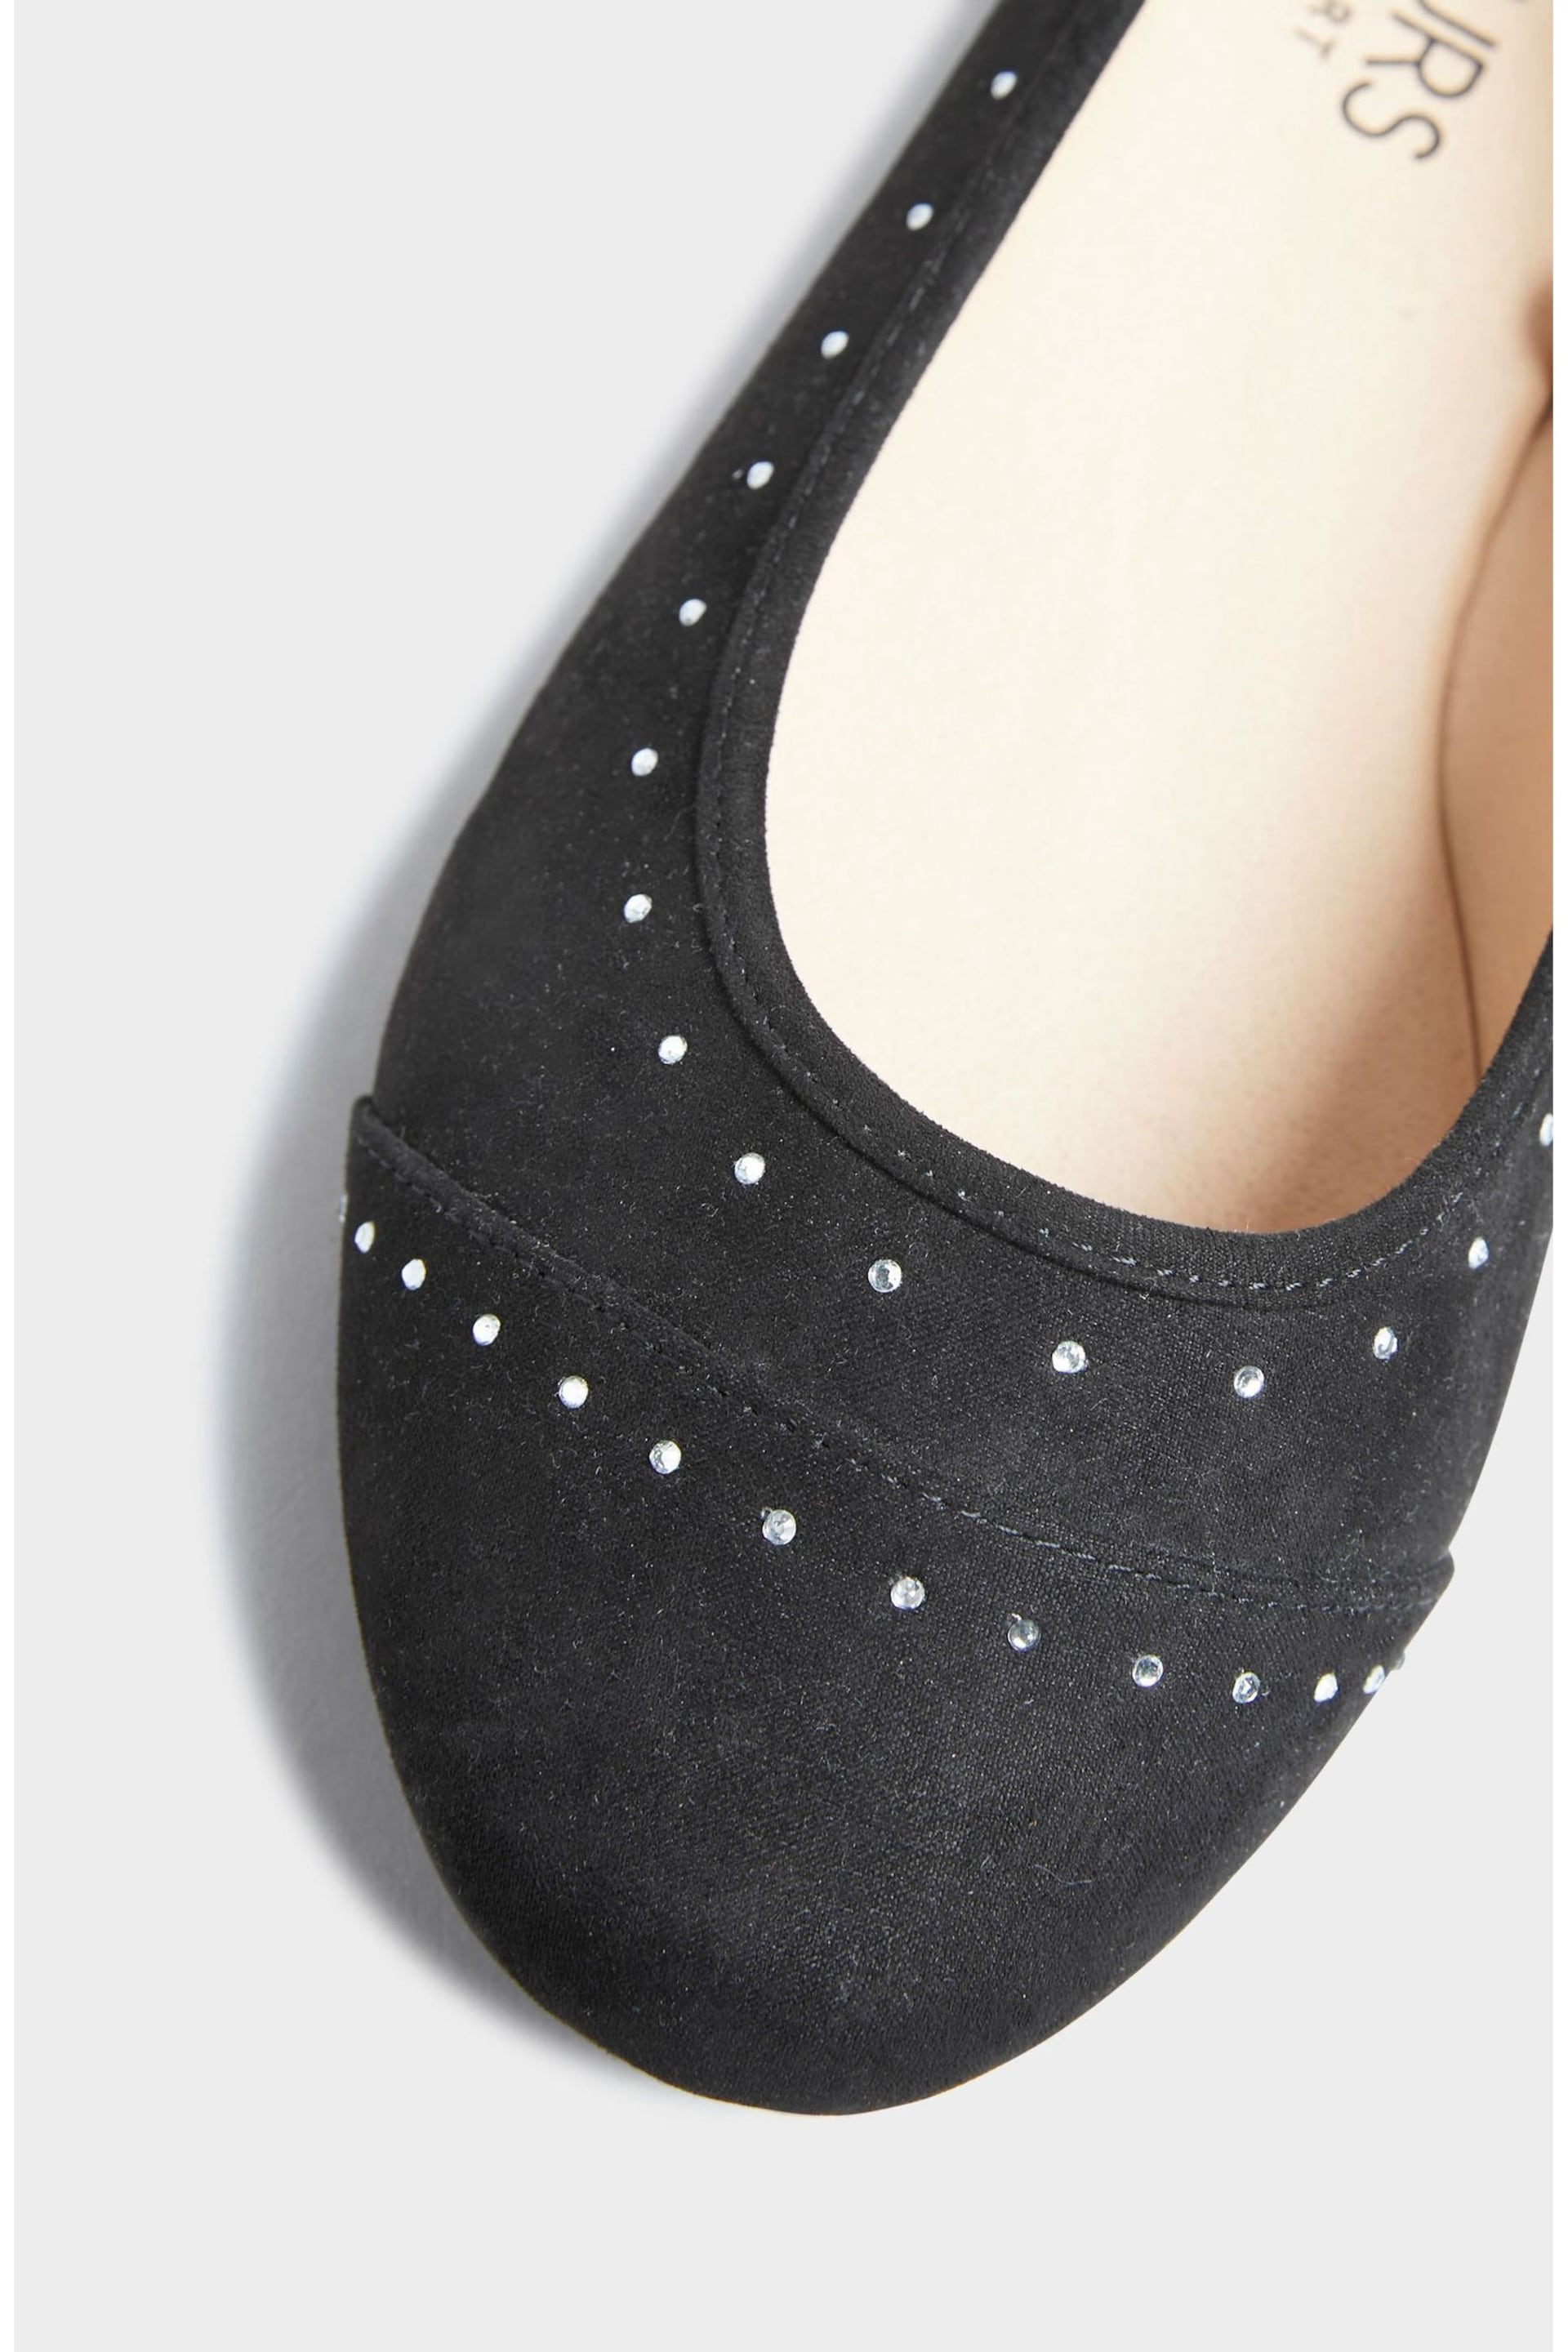 Yours Curve Black Extra-Wide Fit Diamante Ballerina Shoes - Image 5 of 5